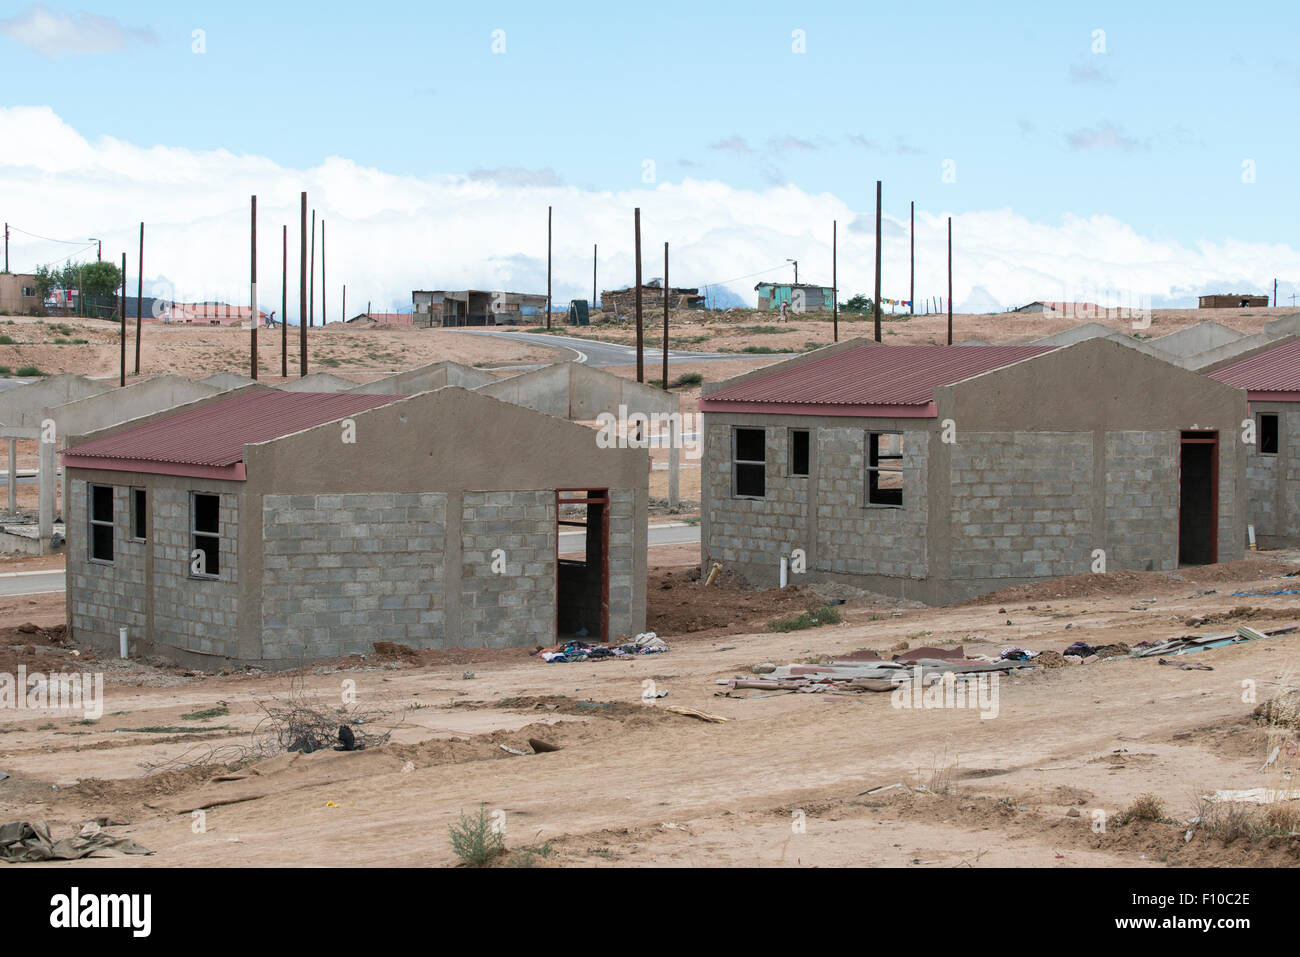 Government supported construction of houses in a township, Oudtshorn, Western Cape, South Africa Stock Photo